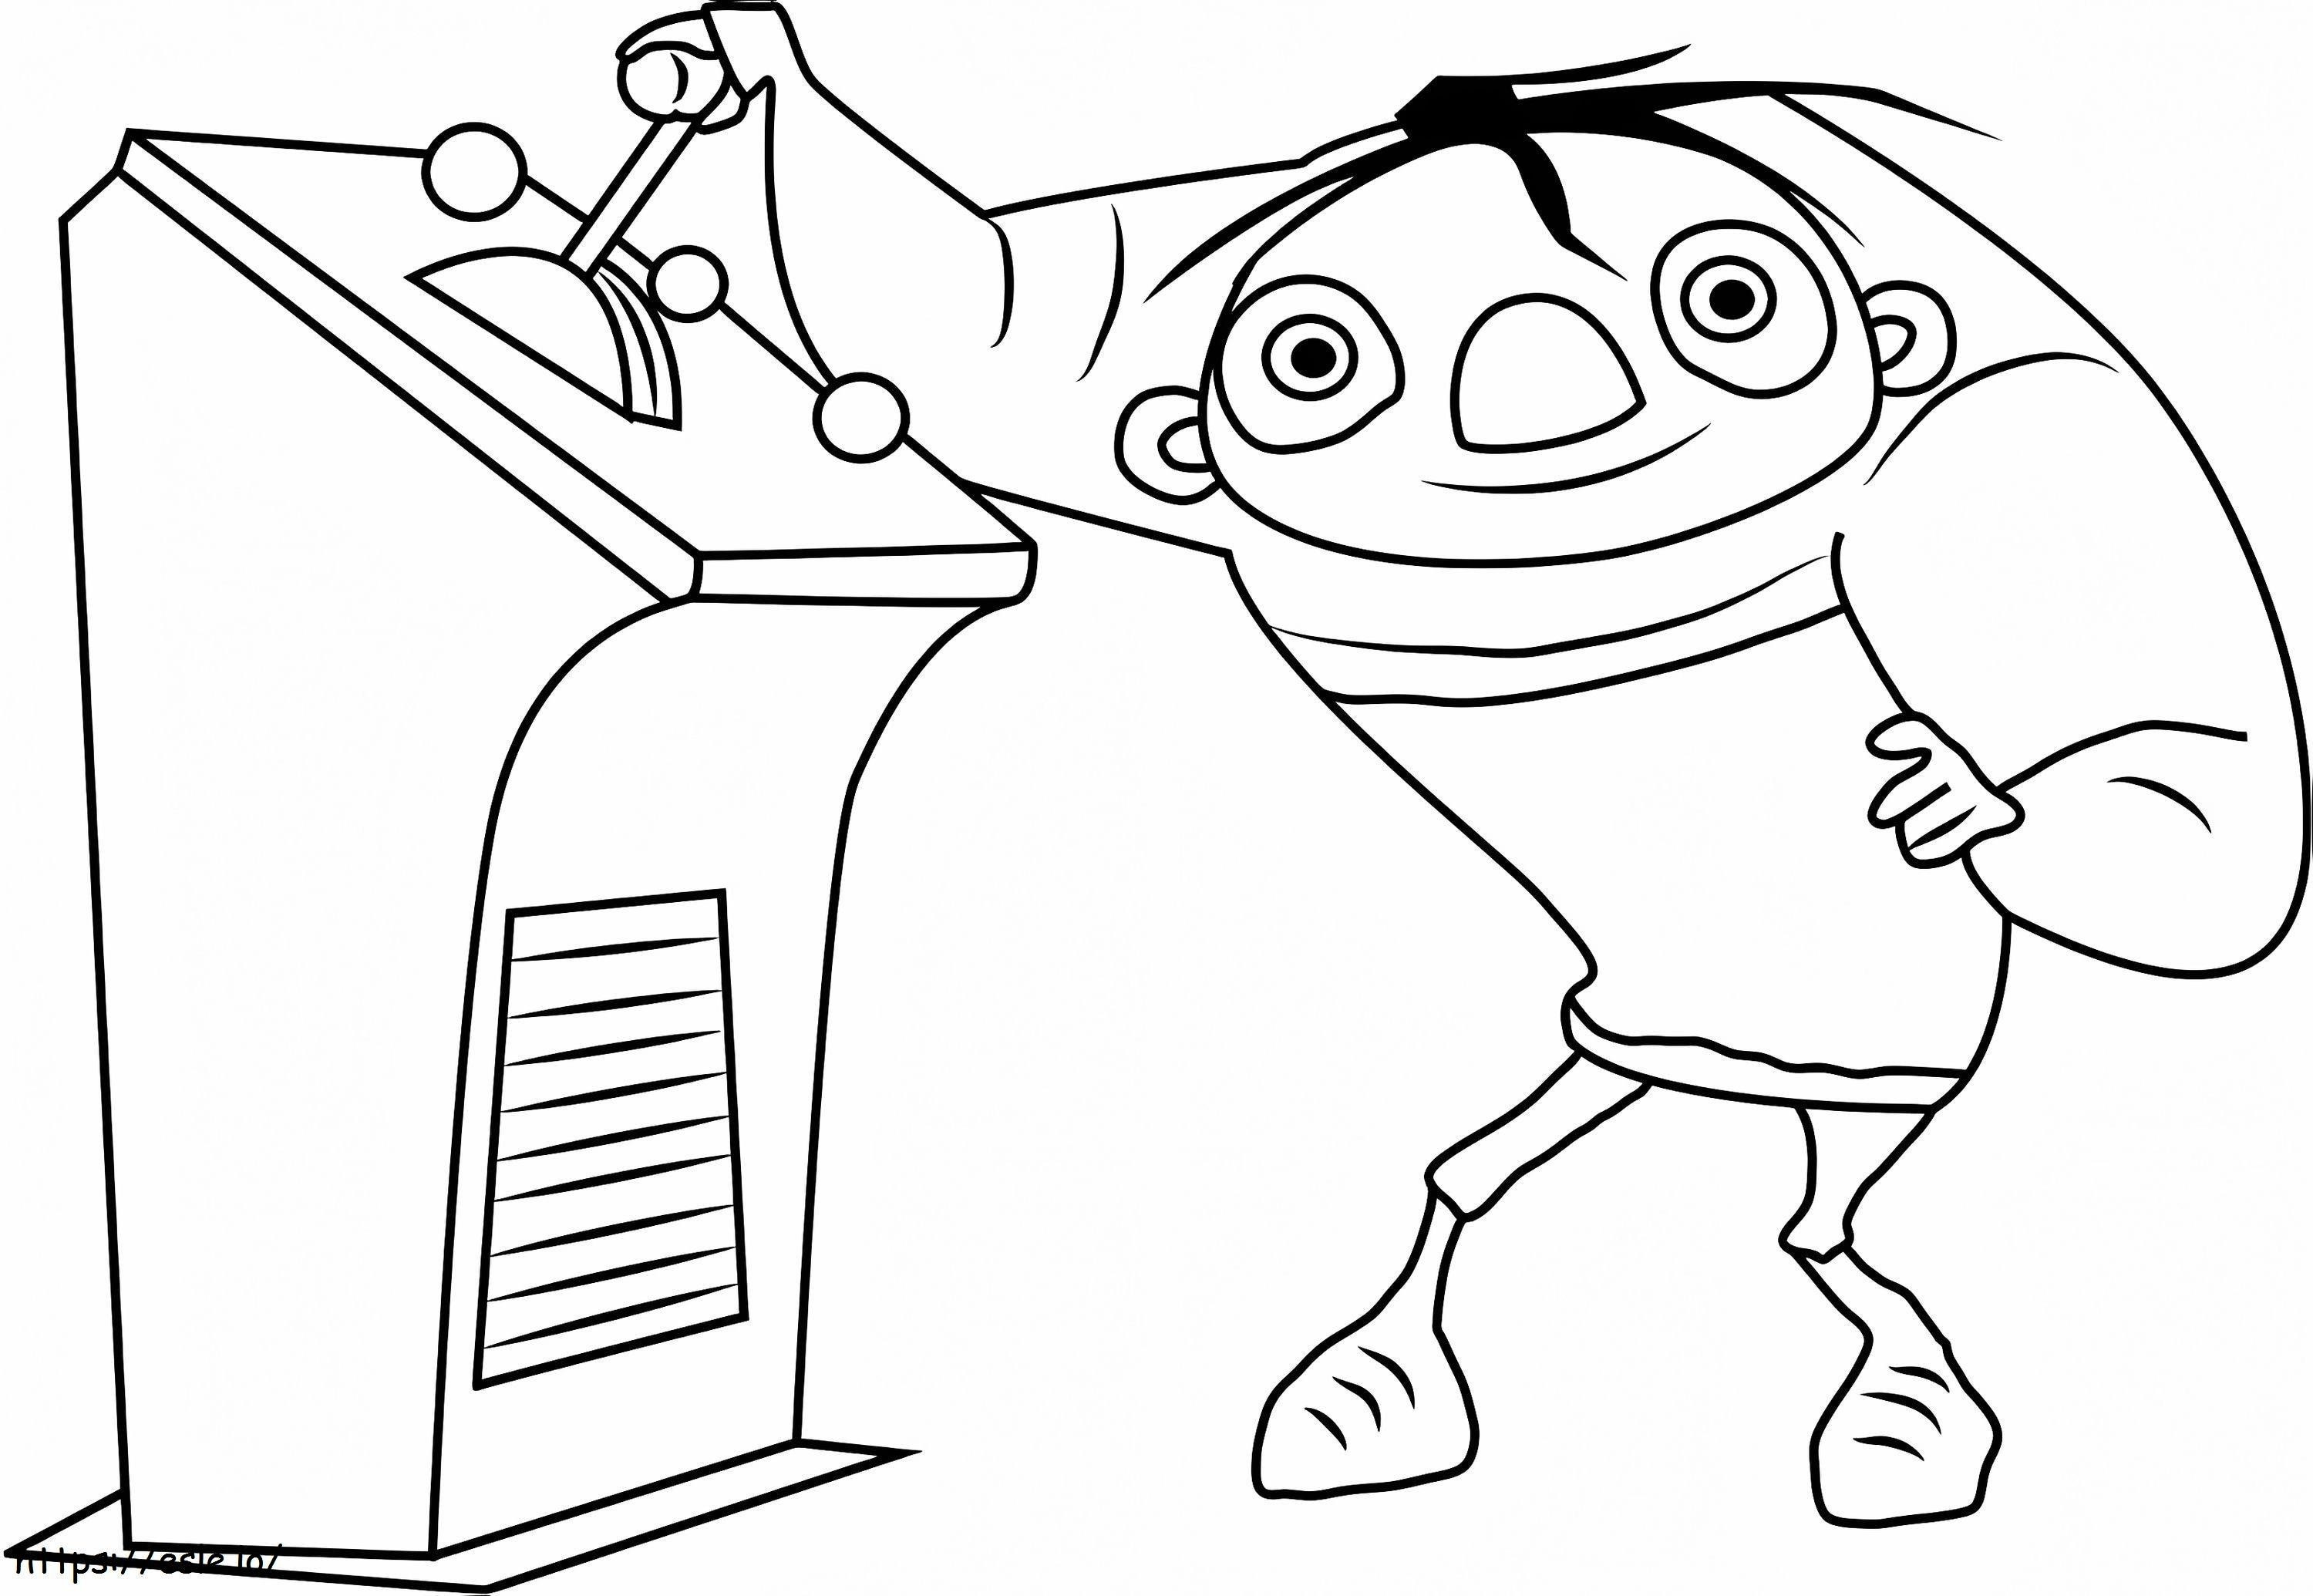 1531535672 Igor Smiling With Gear A4 E1600396698158 coloring page